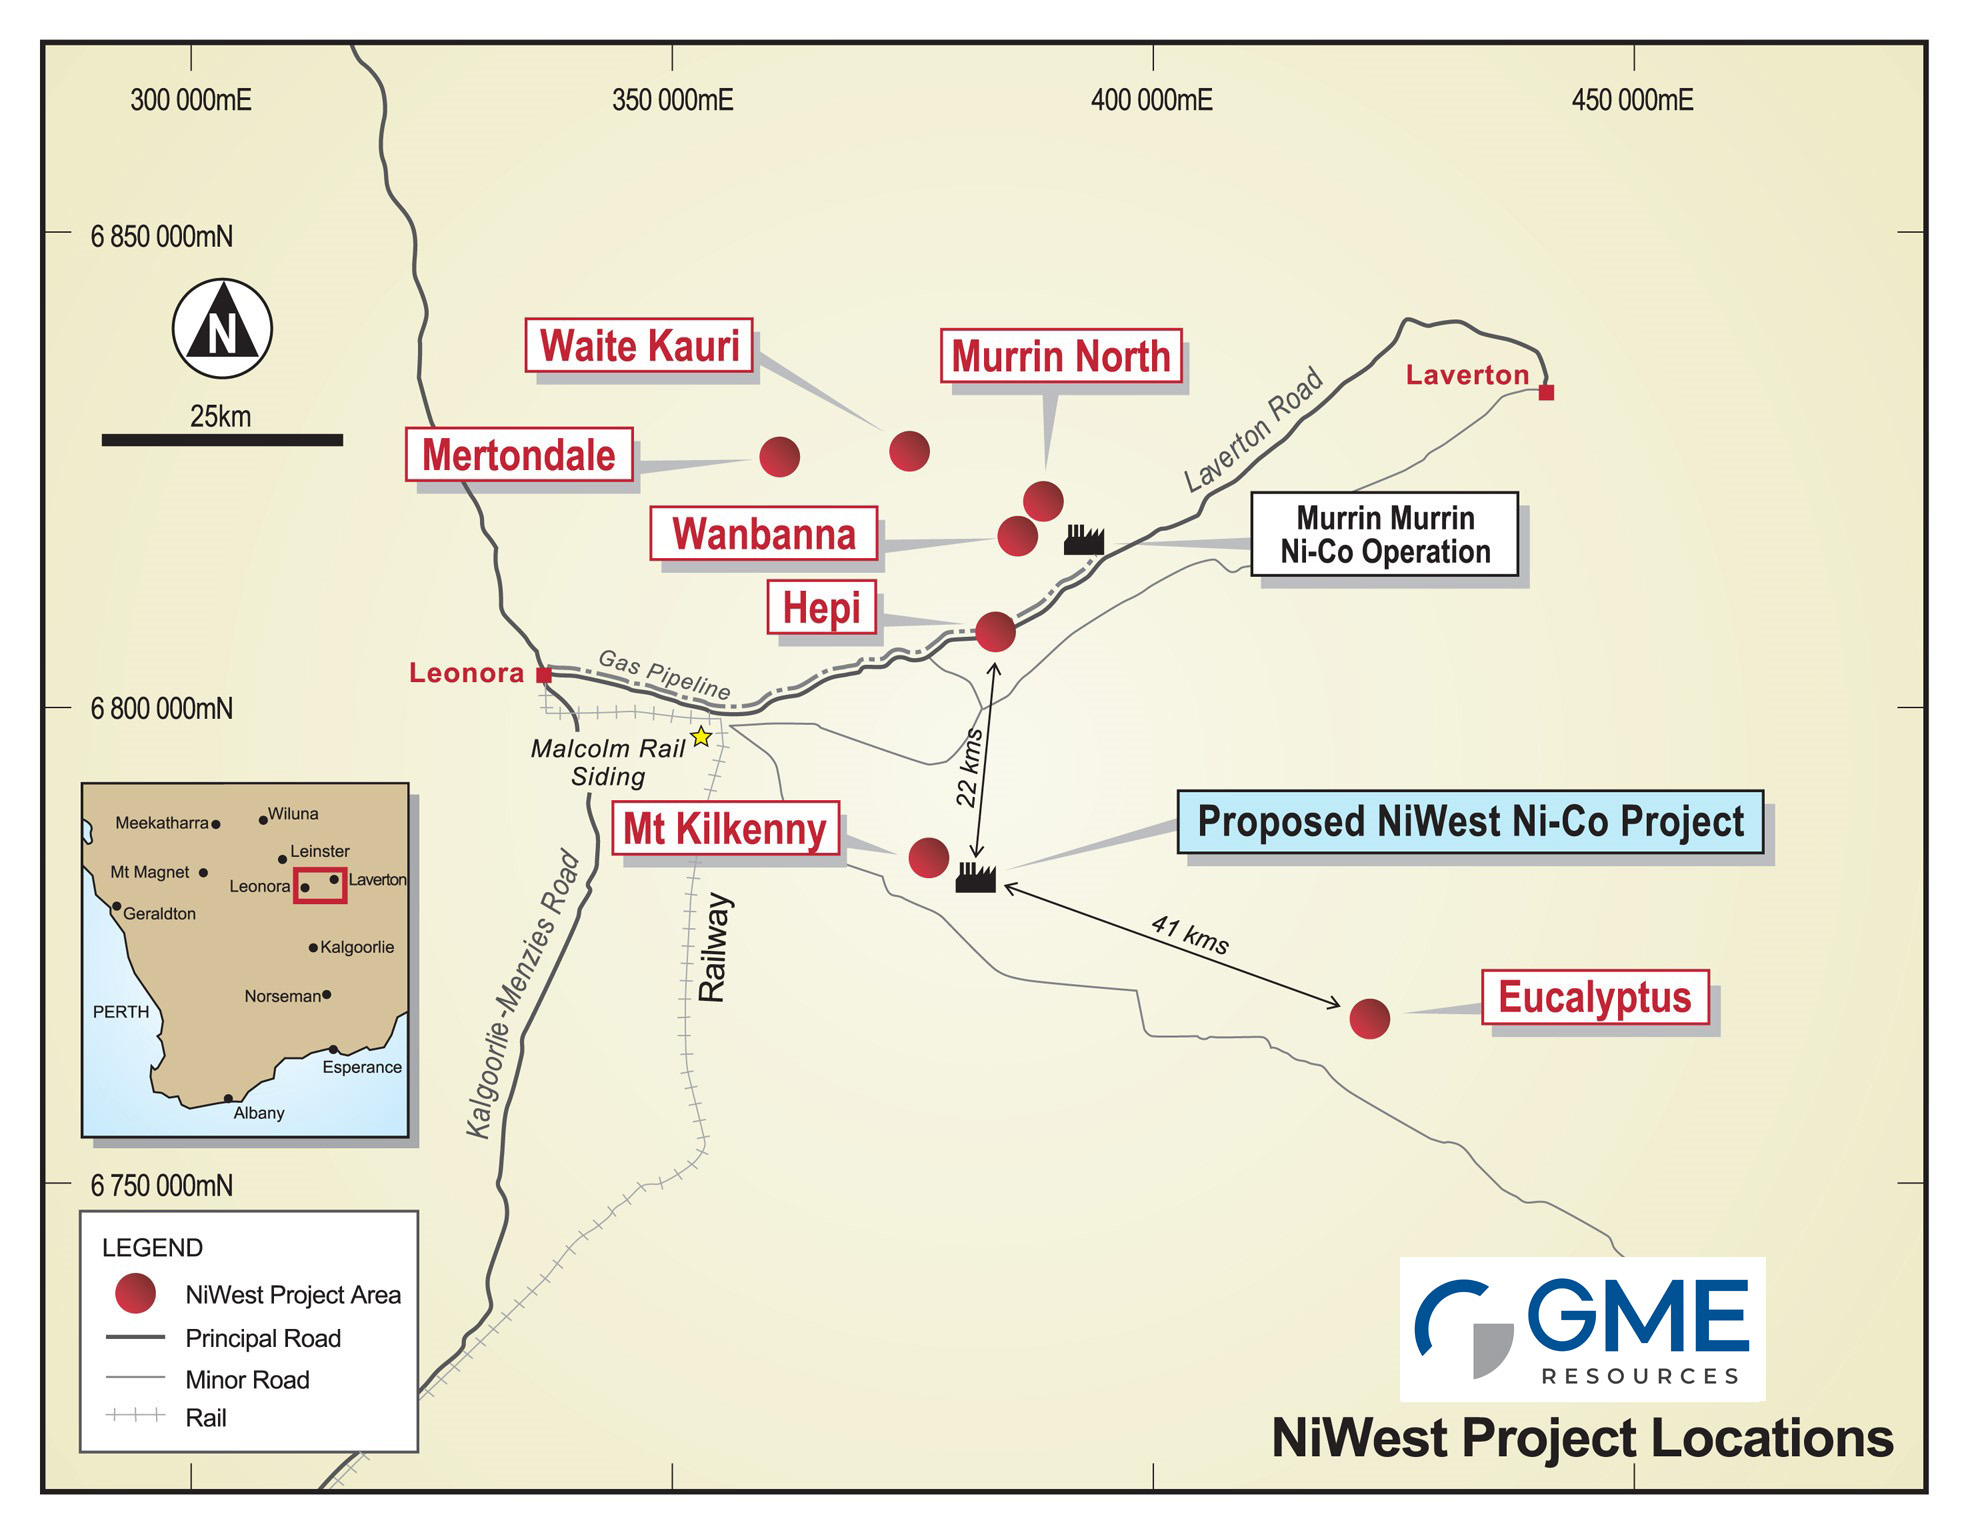 NiWest Project Location